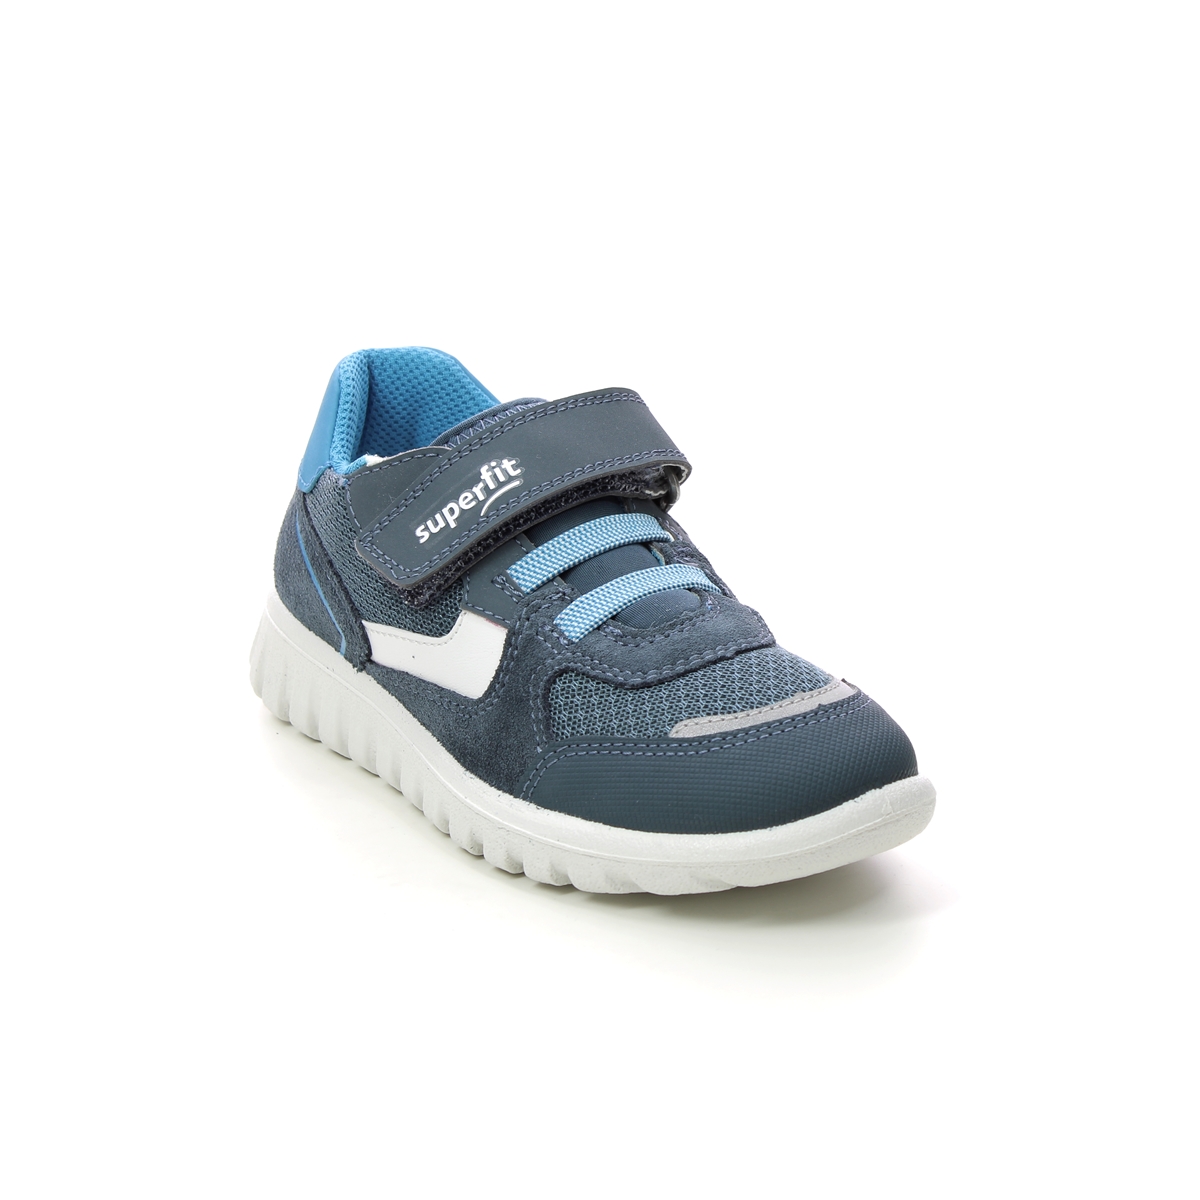 Superfit Sport7 Mini Bungee Navy Kids Trainers 1006195-8030 In Size 29 In Plain Navy For kids